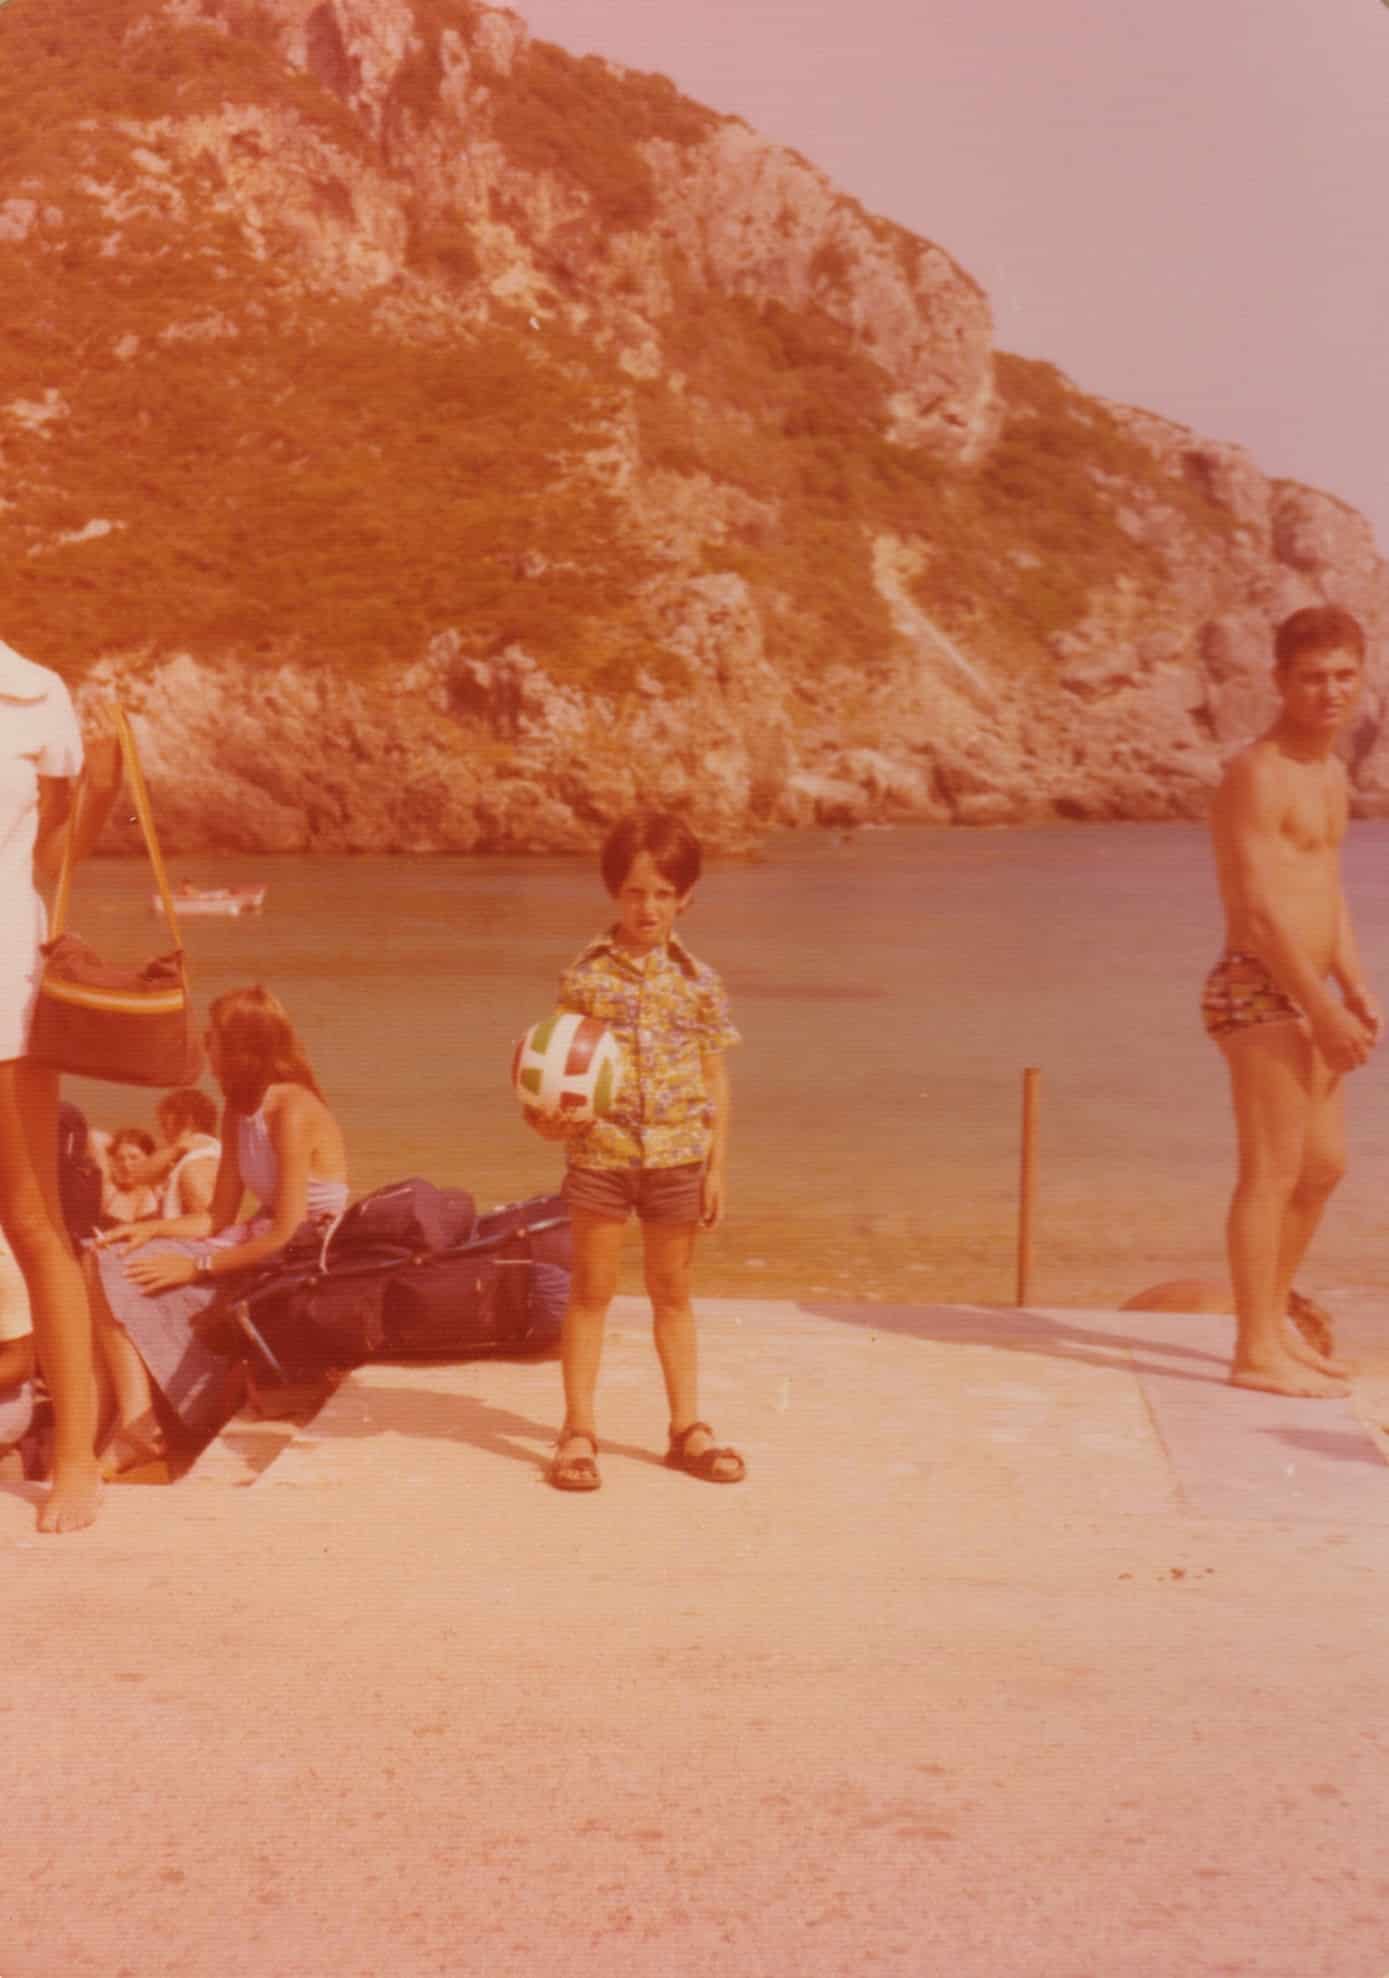 Original… Photo of Gilad taken in the same vacation in the 1970s